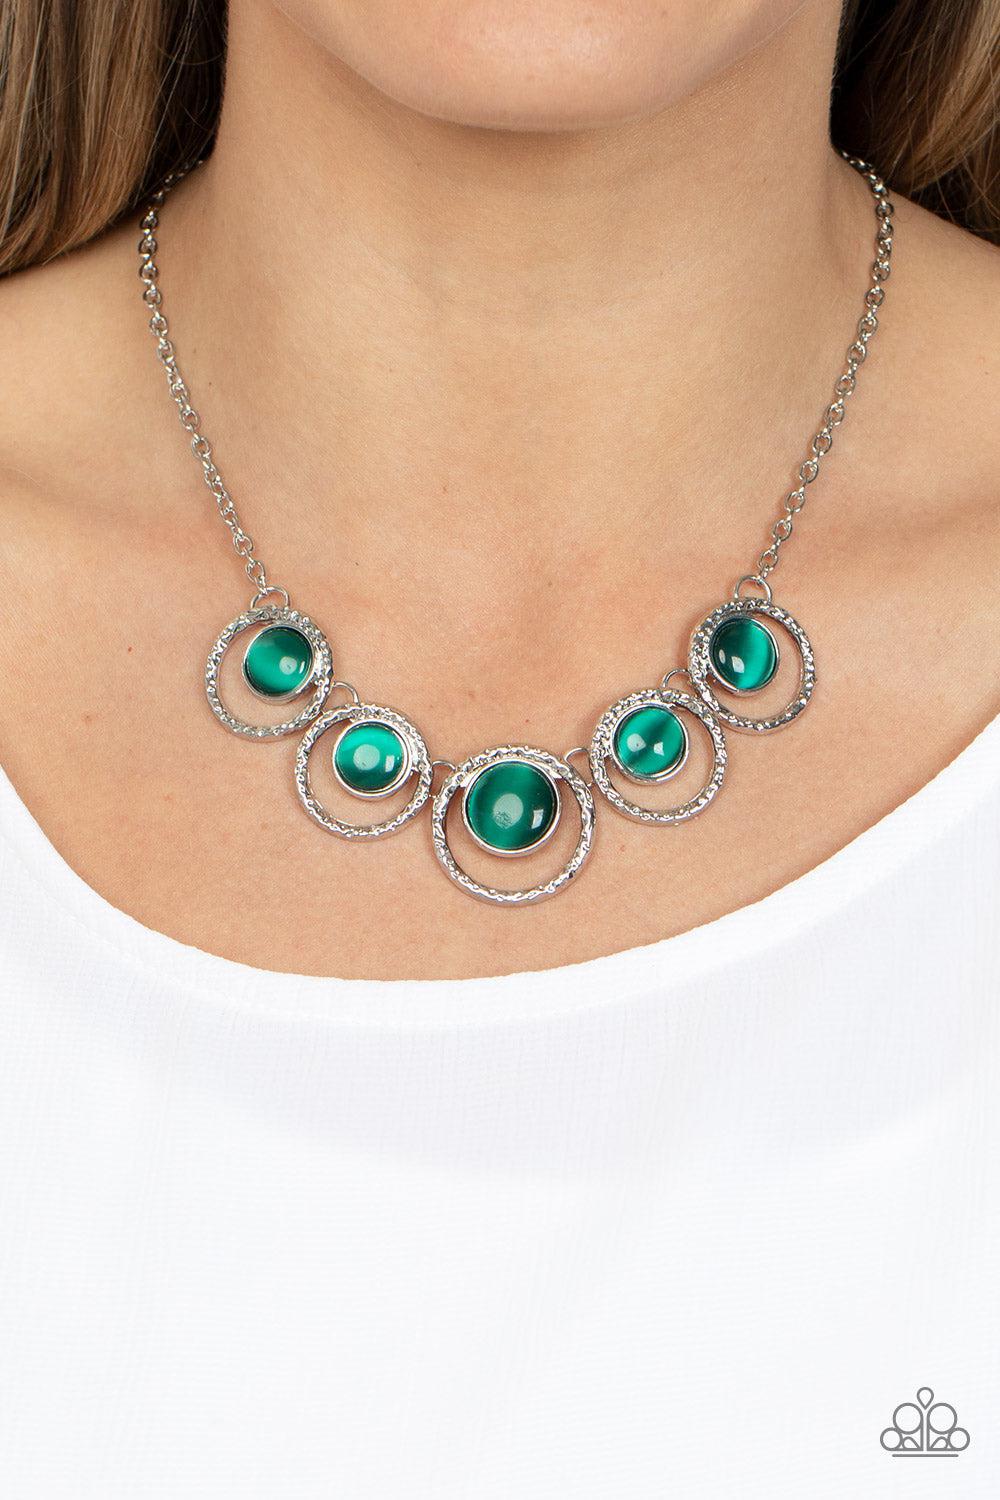 Elliptical Enchantment Green Cat's Eye Stone Necklace - Paparazzi Accessories- lightbox - CarasShop.com - $5 Jewelry by Cara Jewels